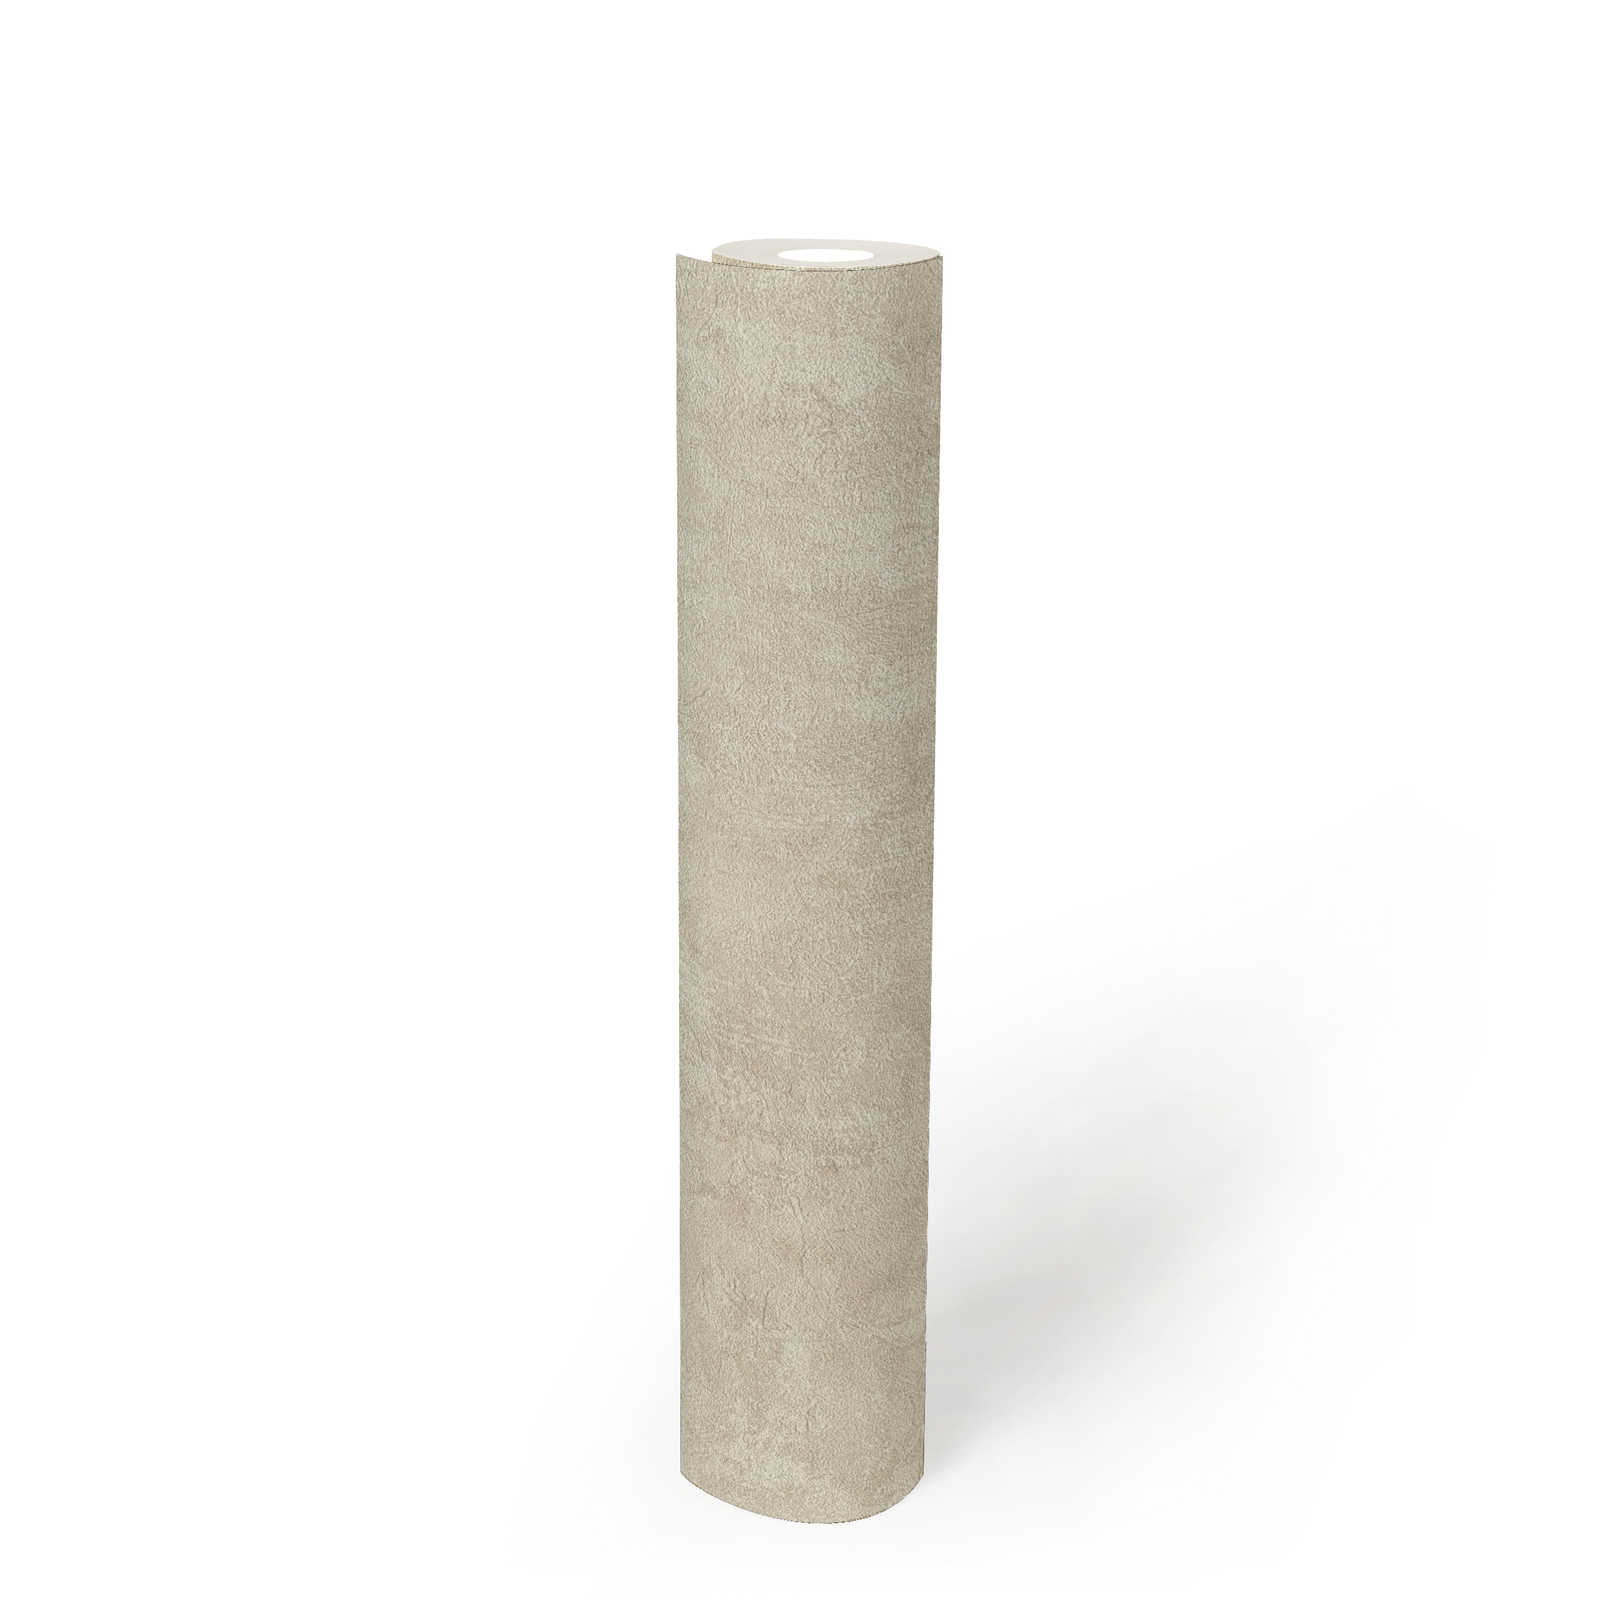             Textured wallpaper with concrete look PVC-free - beige
        